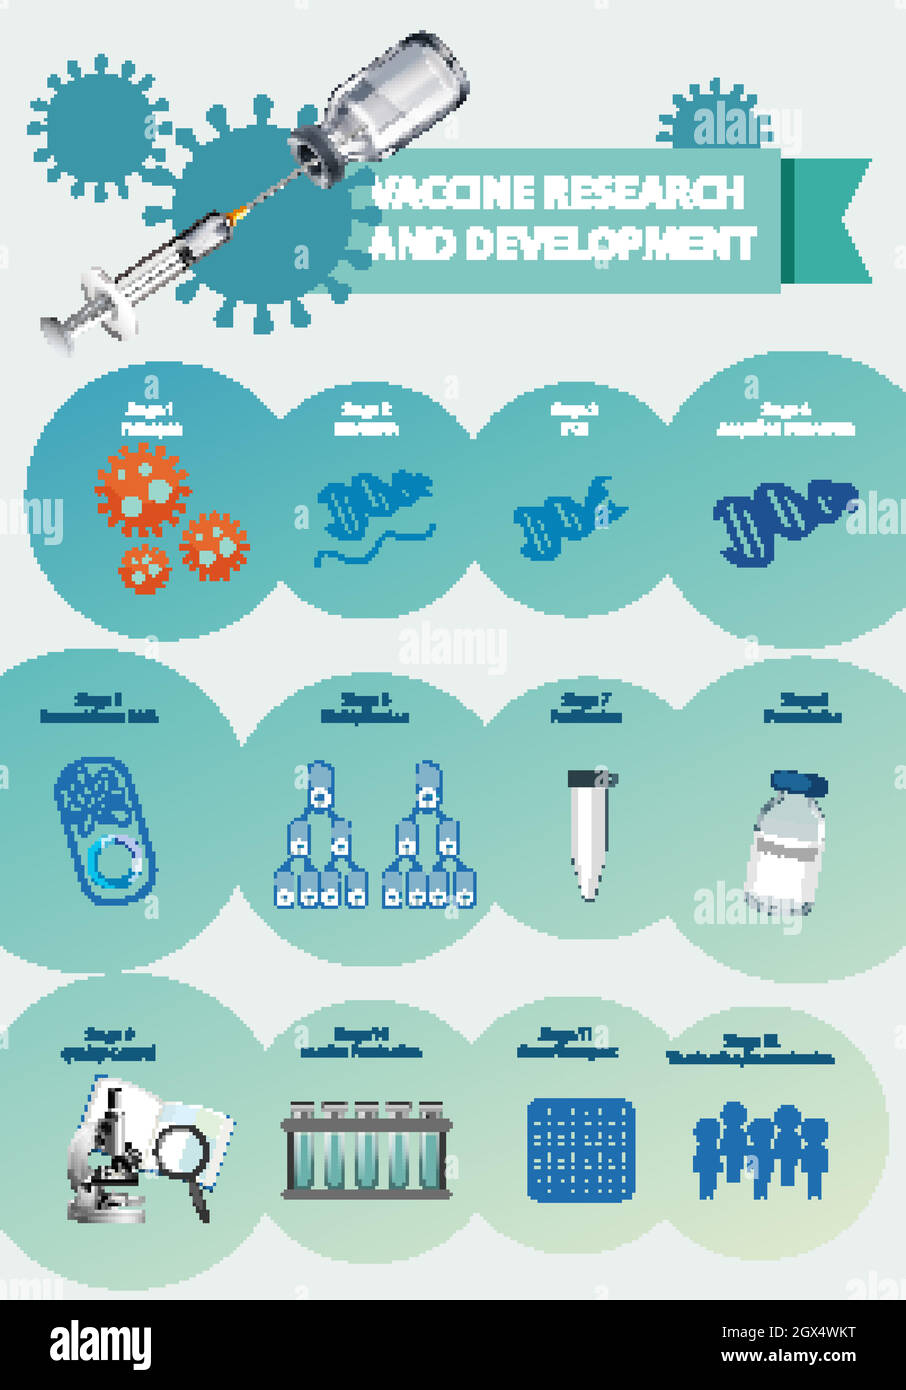 Vaccine research and development infographic Stock Vector